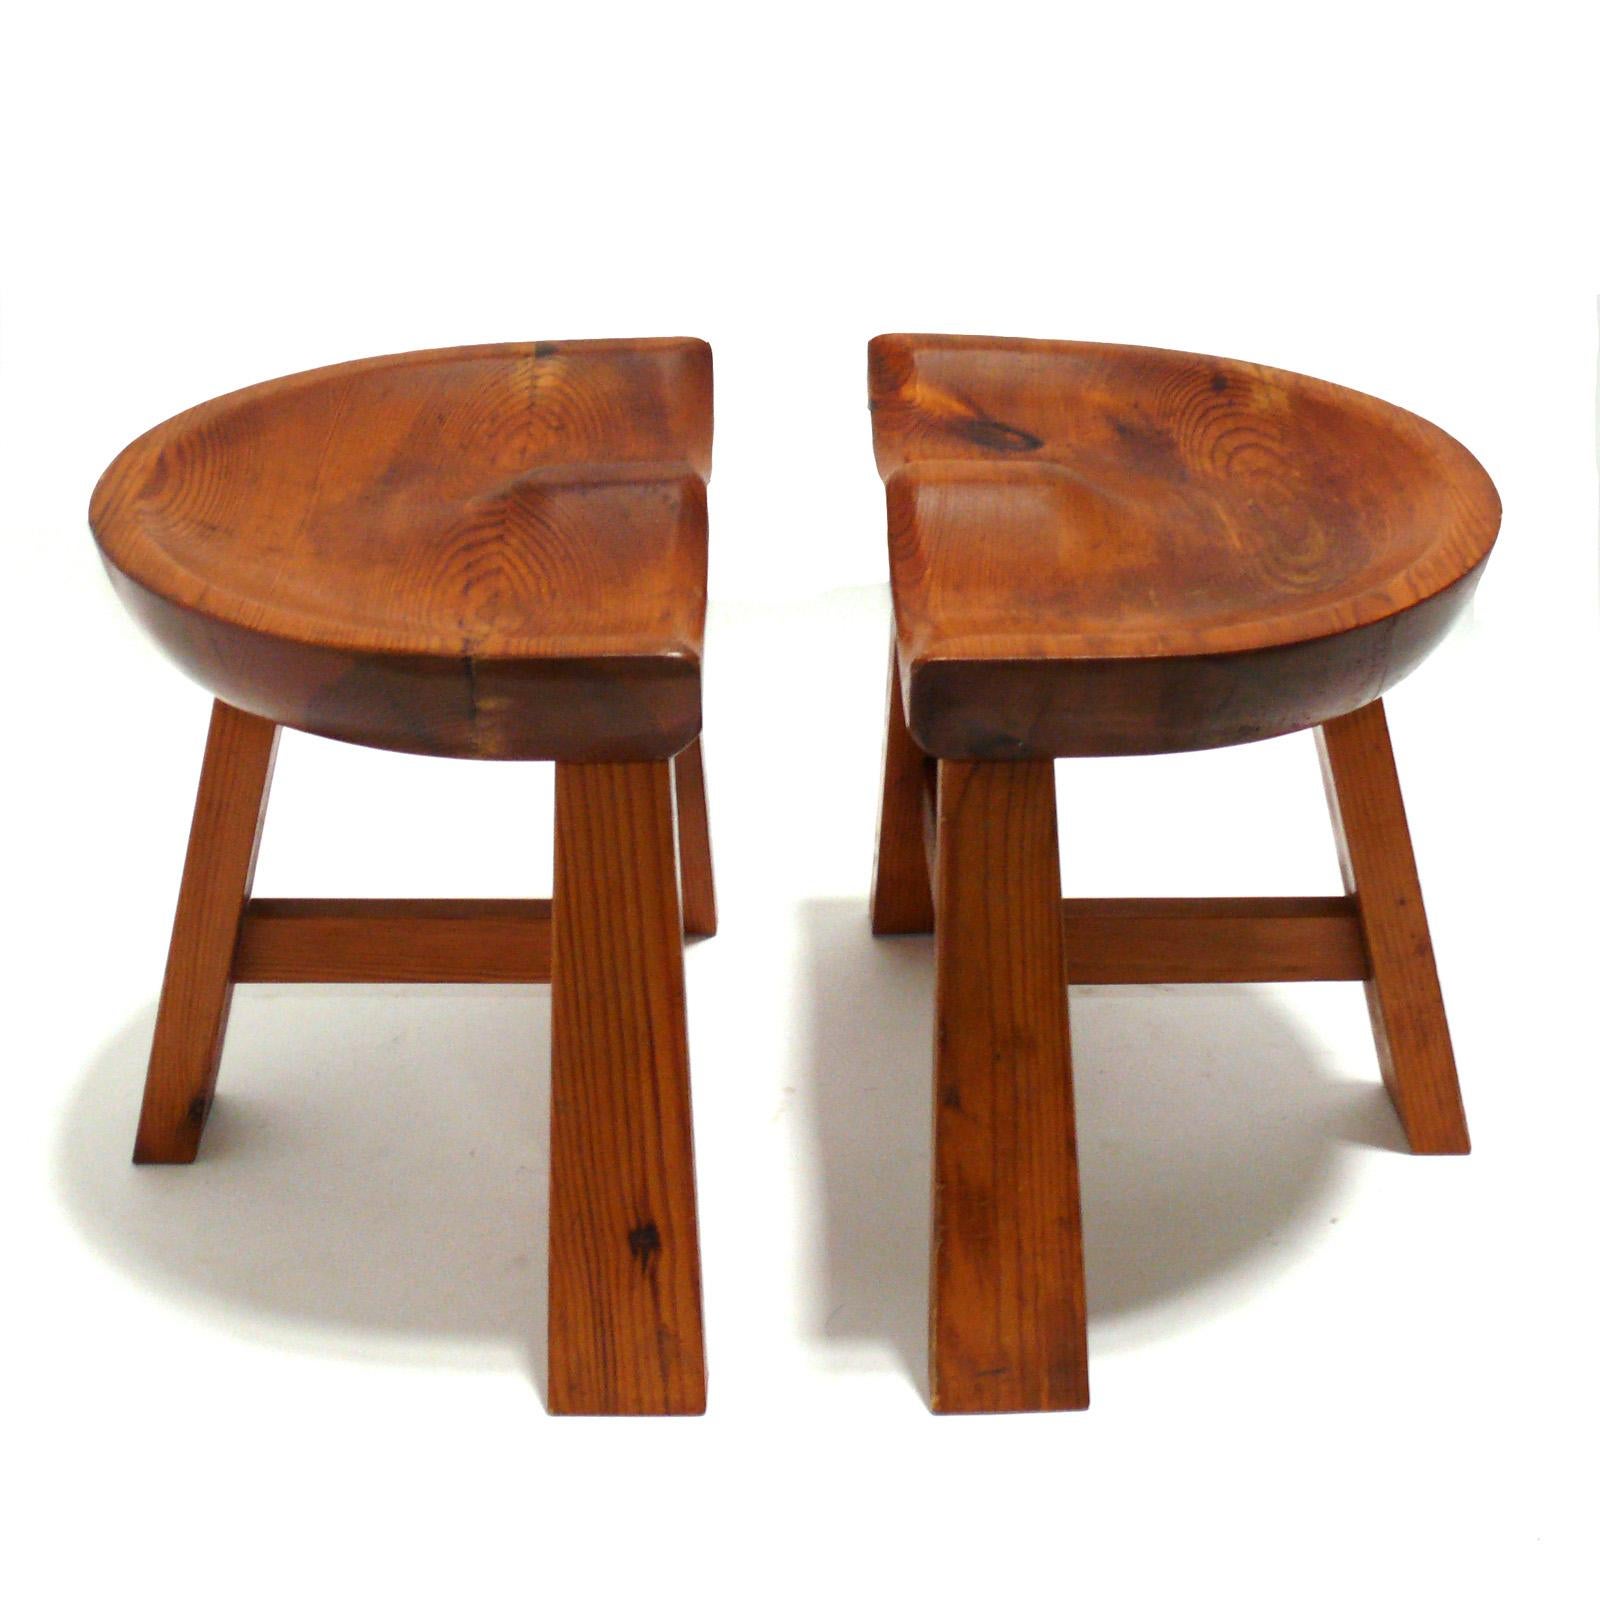 Rustic Curvaceous Tripod Stools For Sale